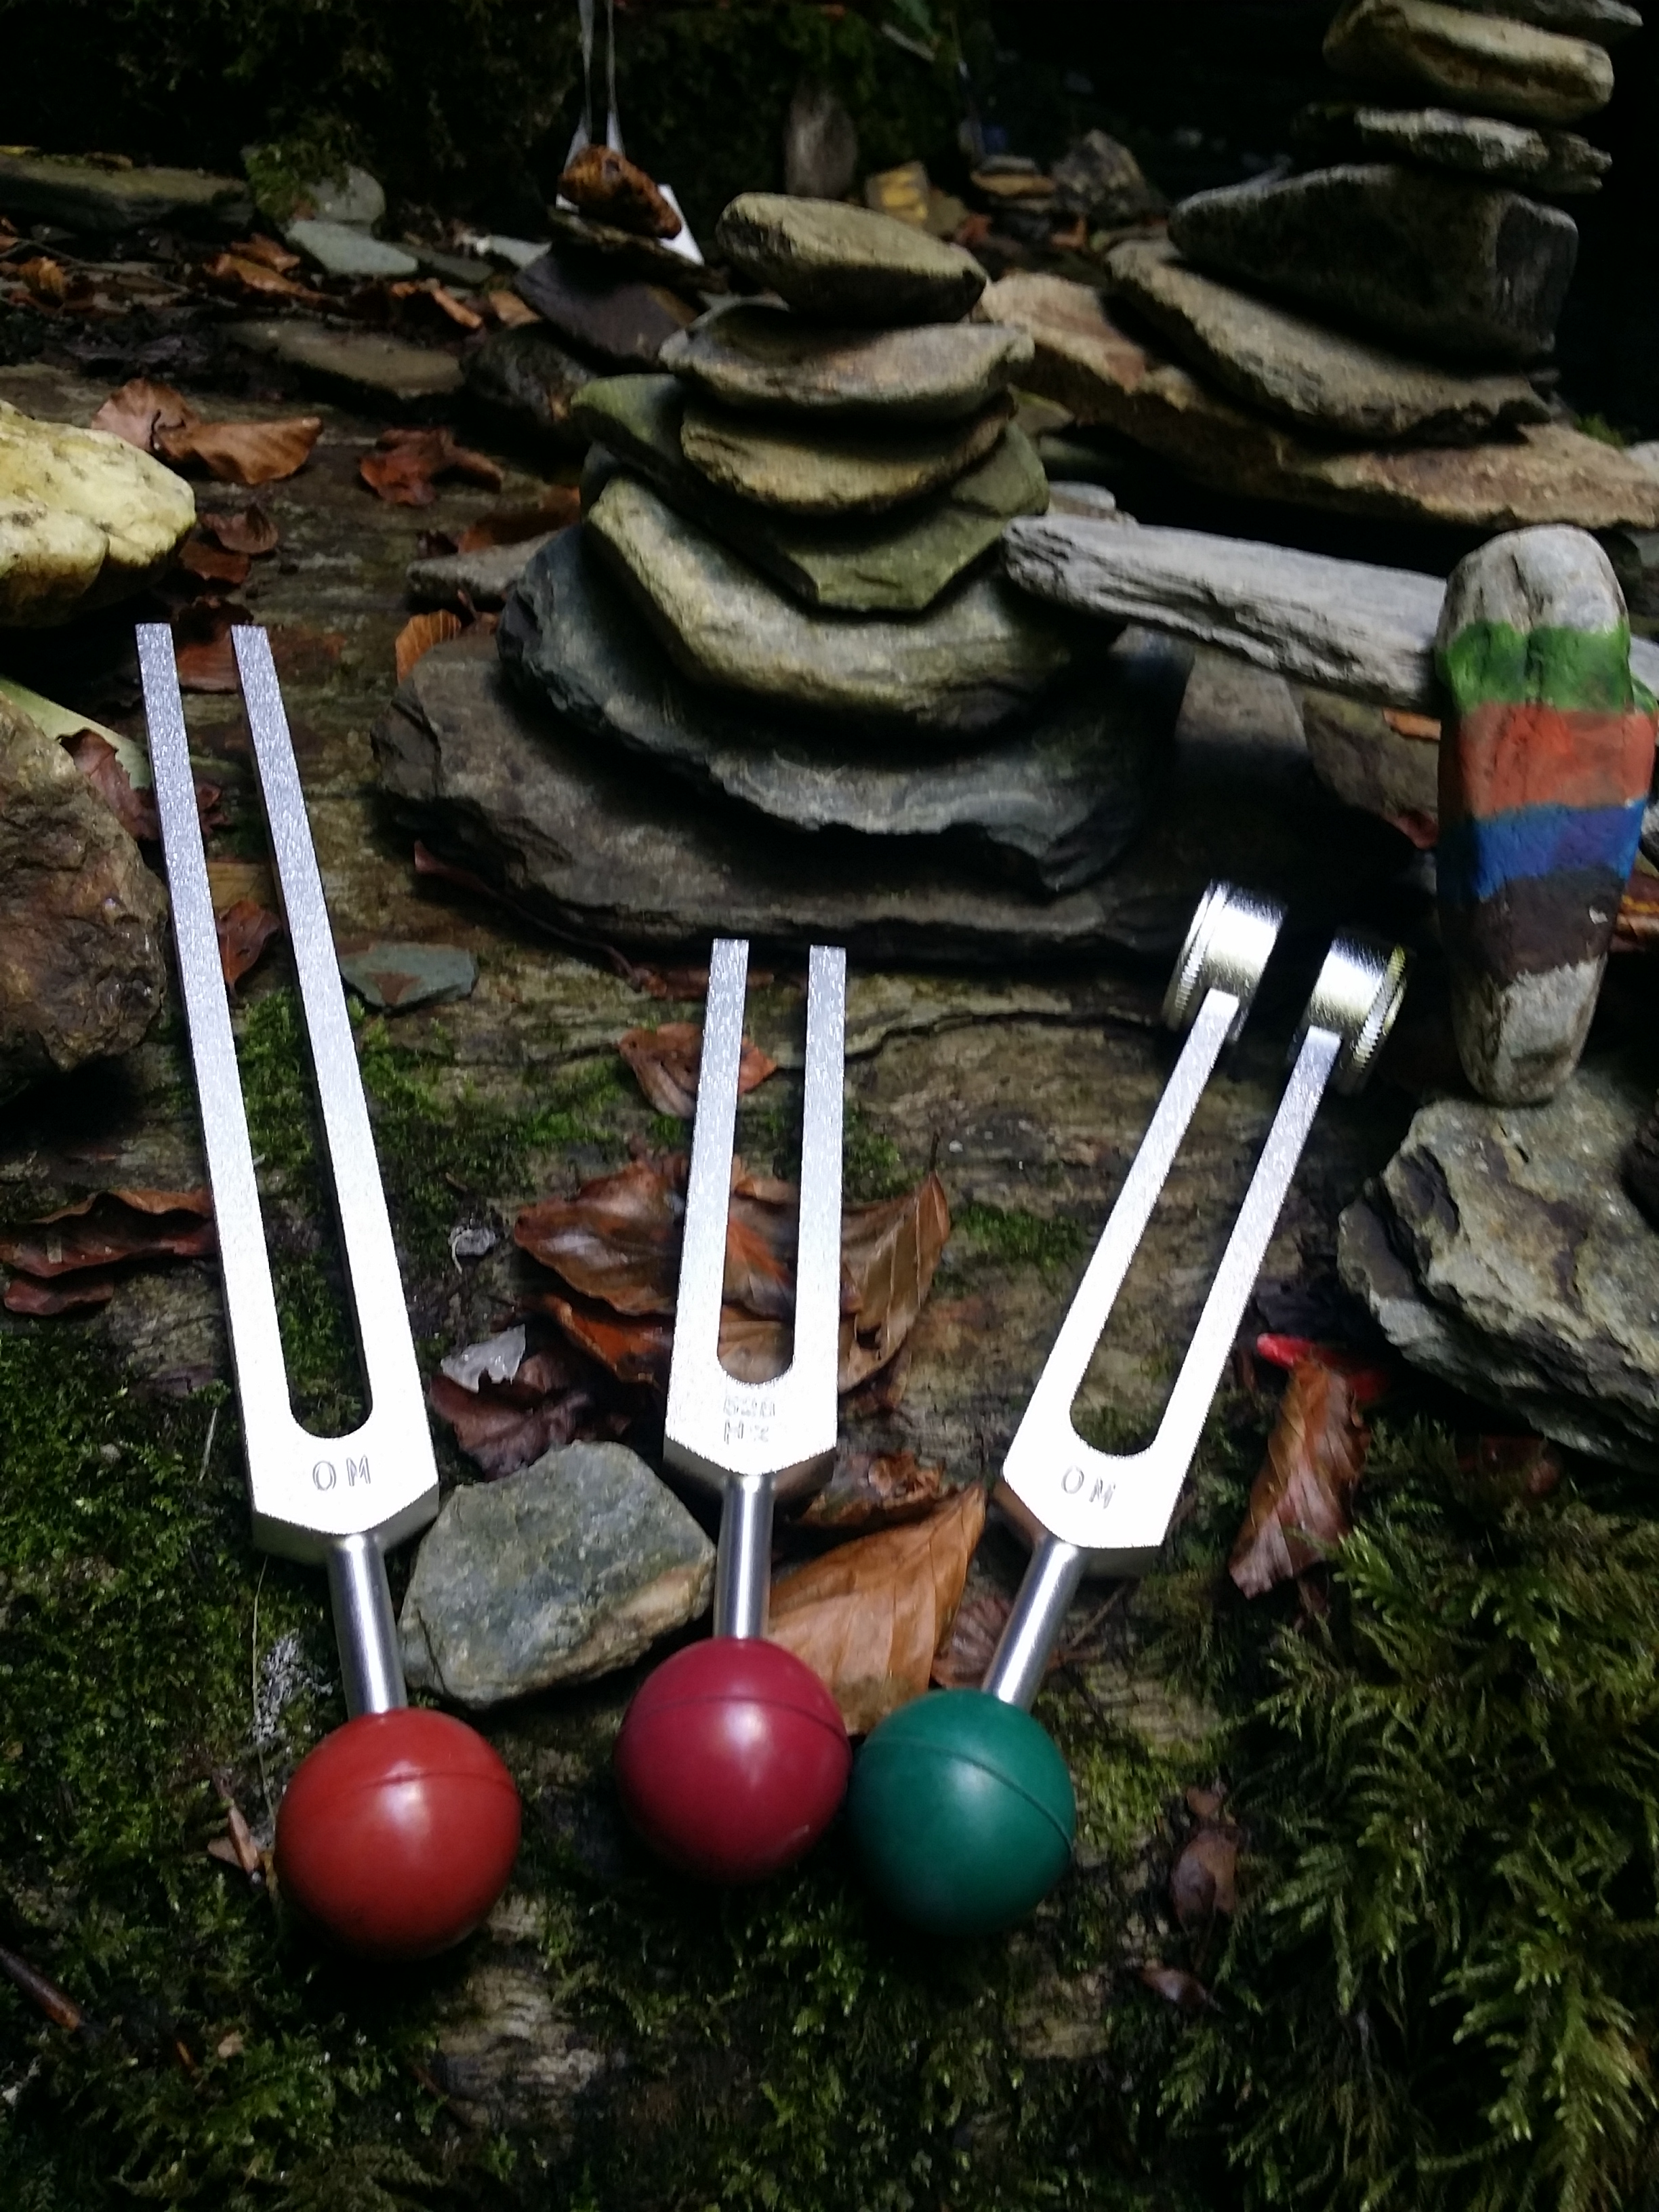 CORNWALL - Introduction to Sound Healing Through Tuning Forks